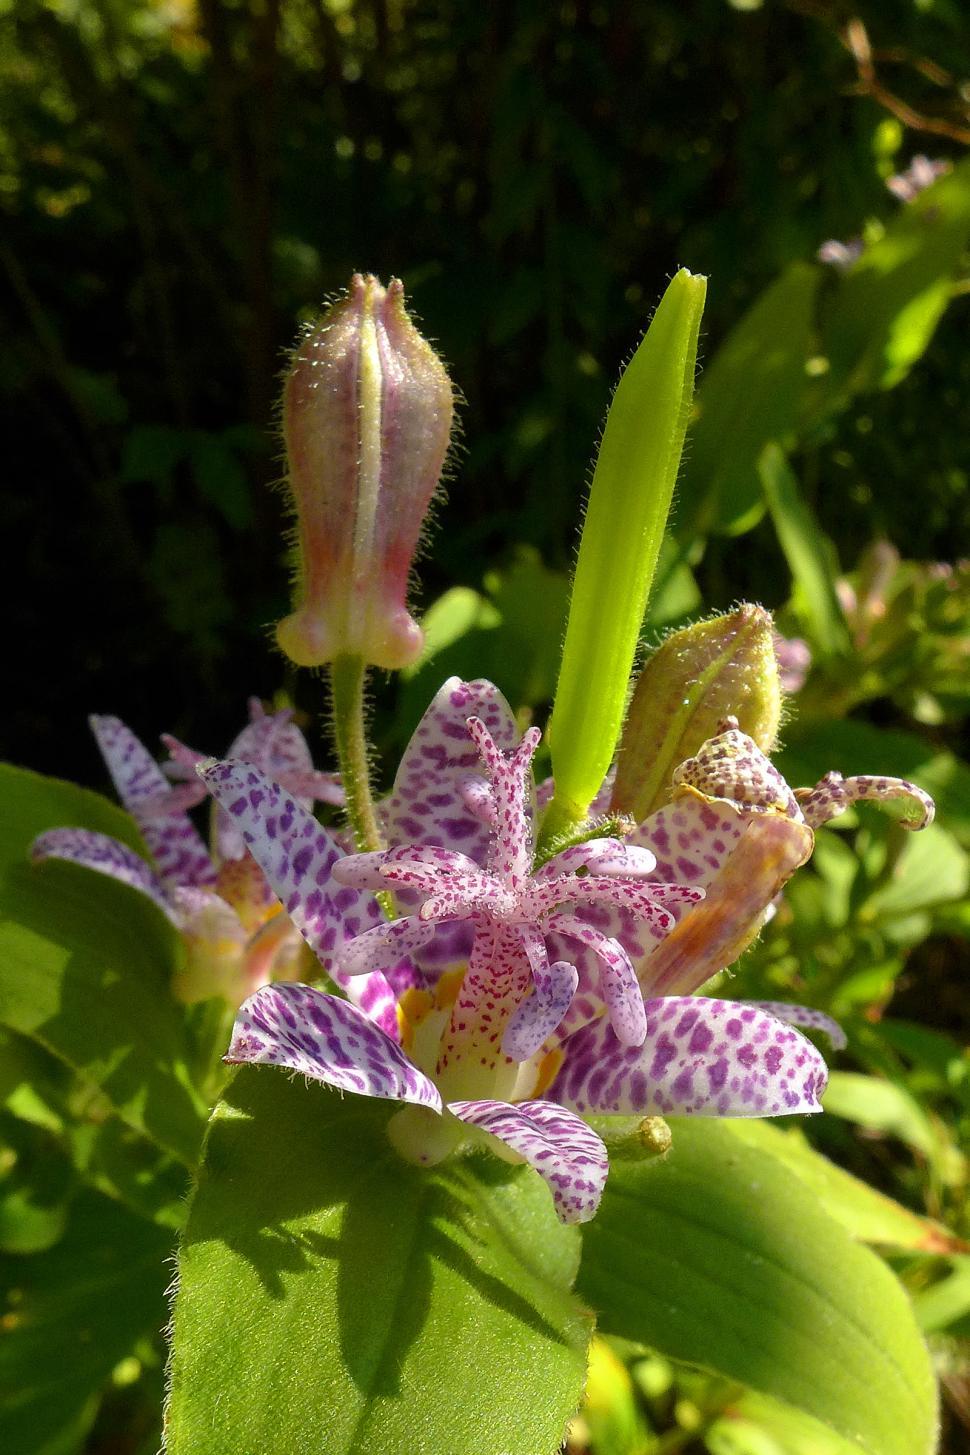 Free Image of Toad Lily Flower Cluster in the sun 